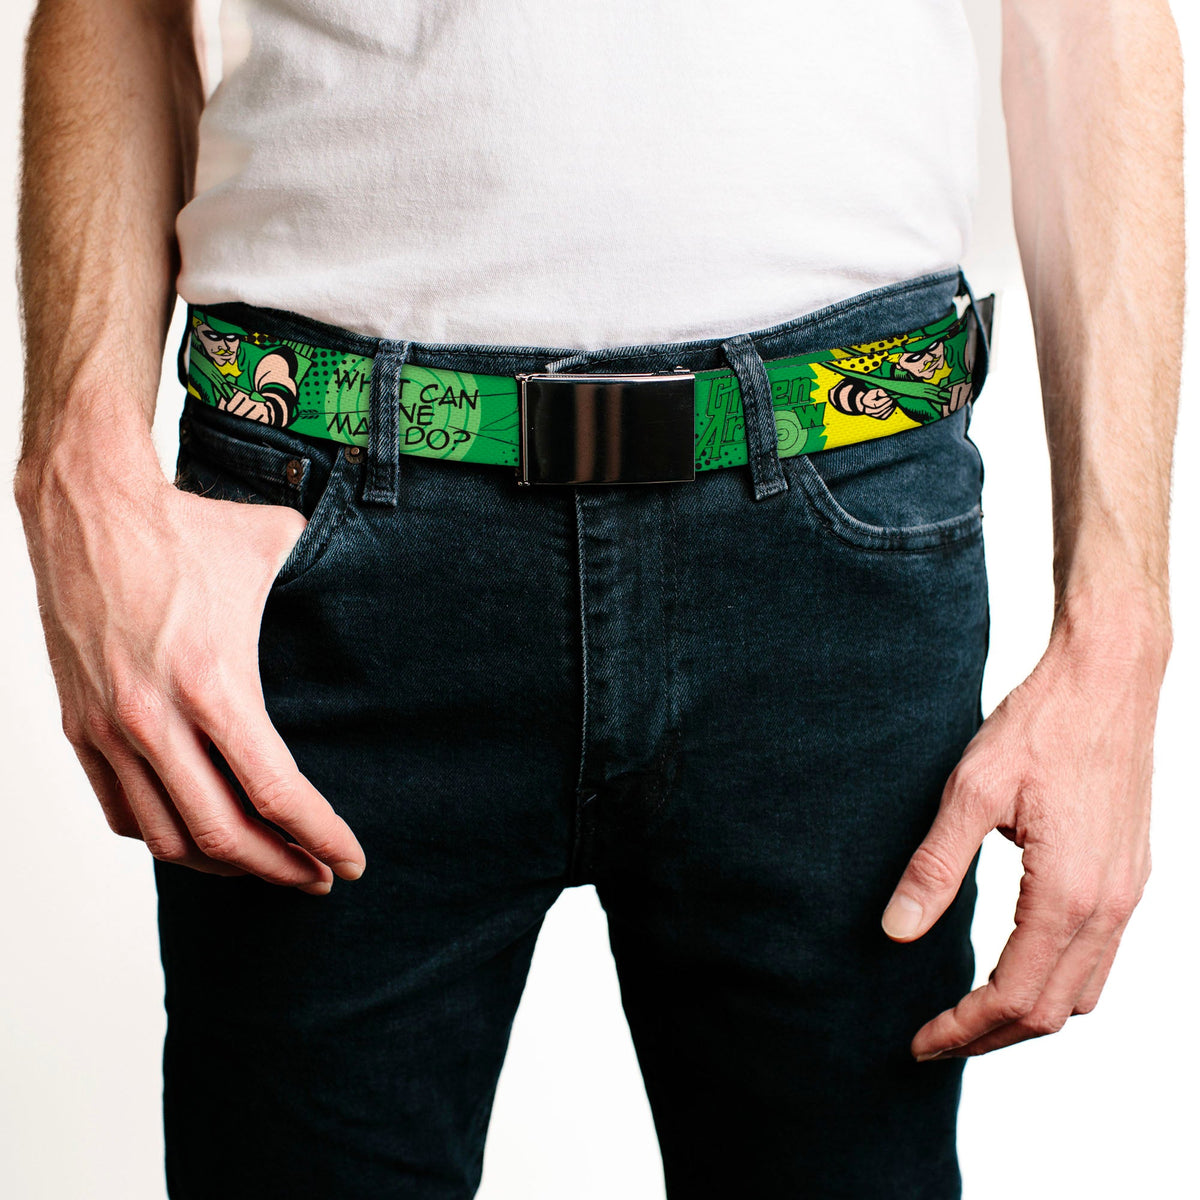 Chrome Buckle Web Belt - GREEN ARROW Poses WHAT CAN ONE MAN DO? Greens/Black Webbing